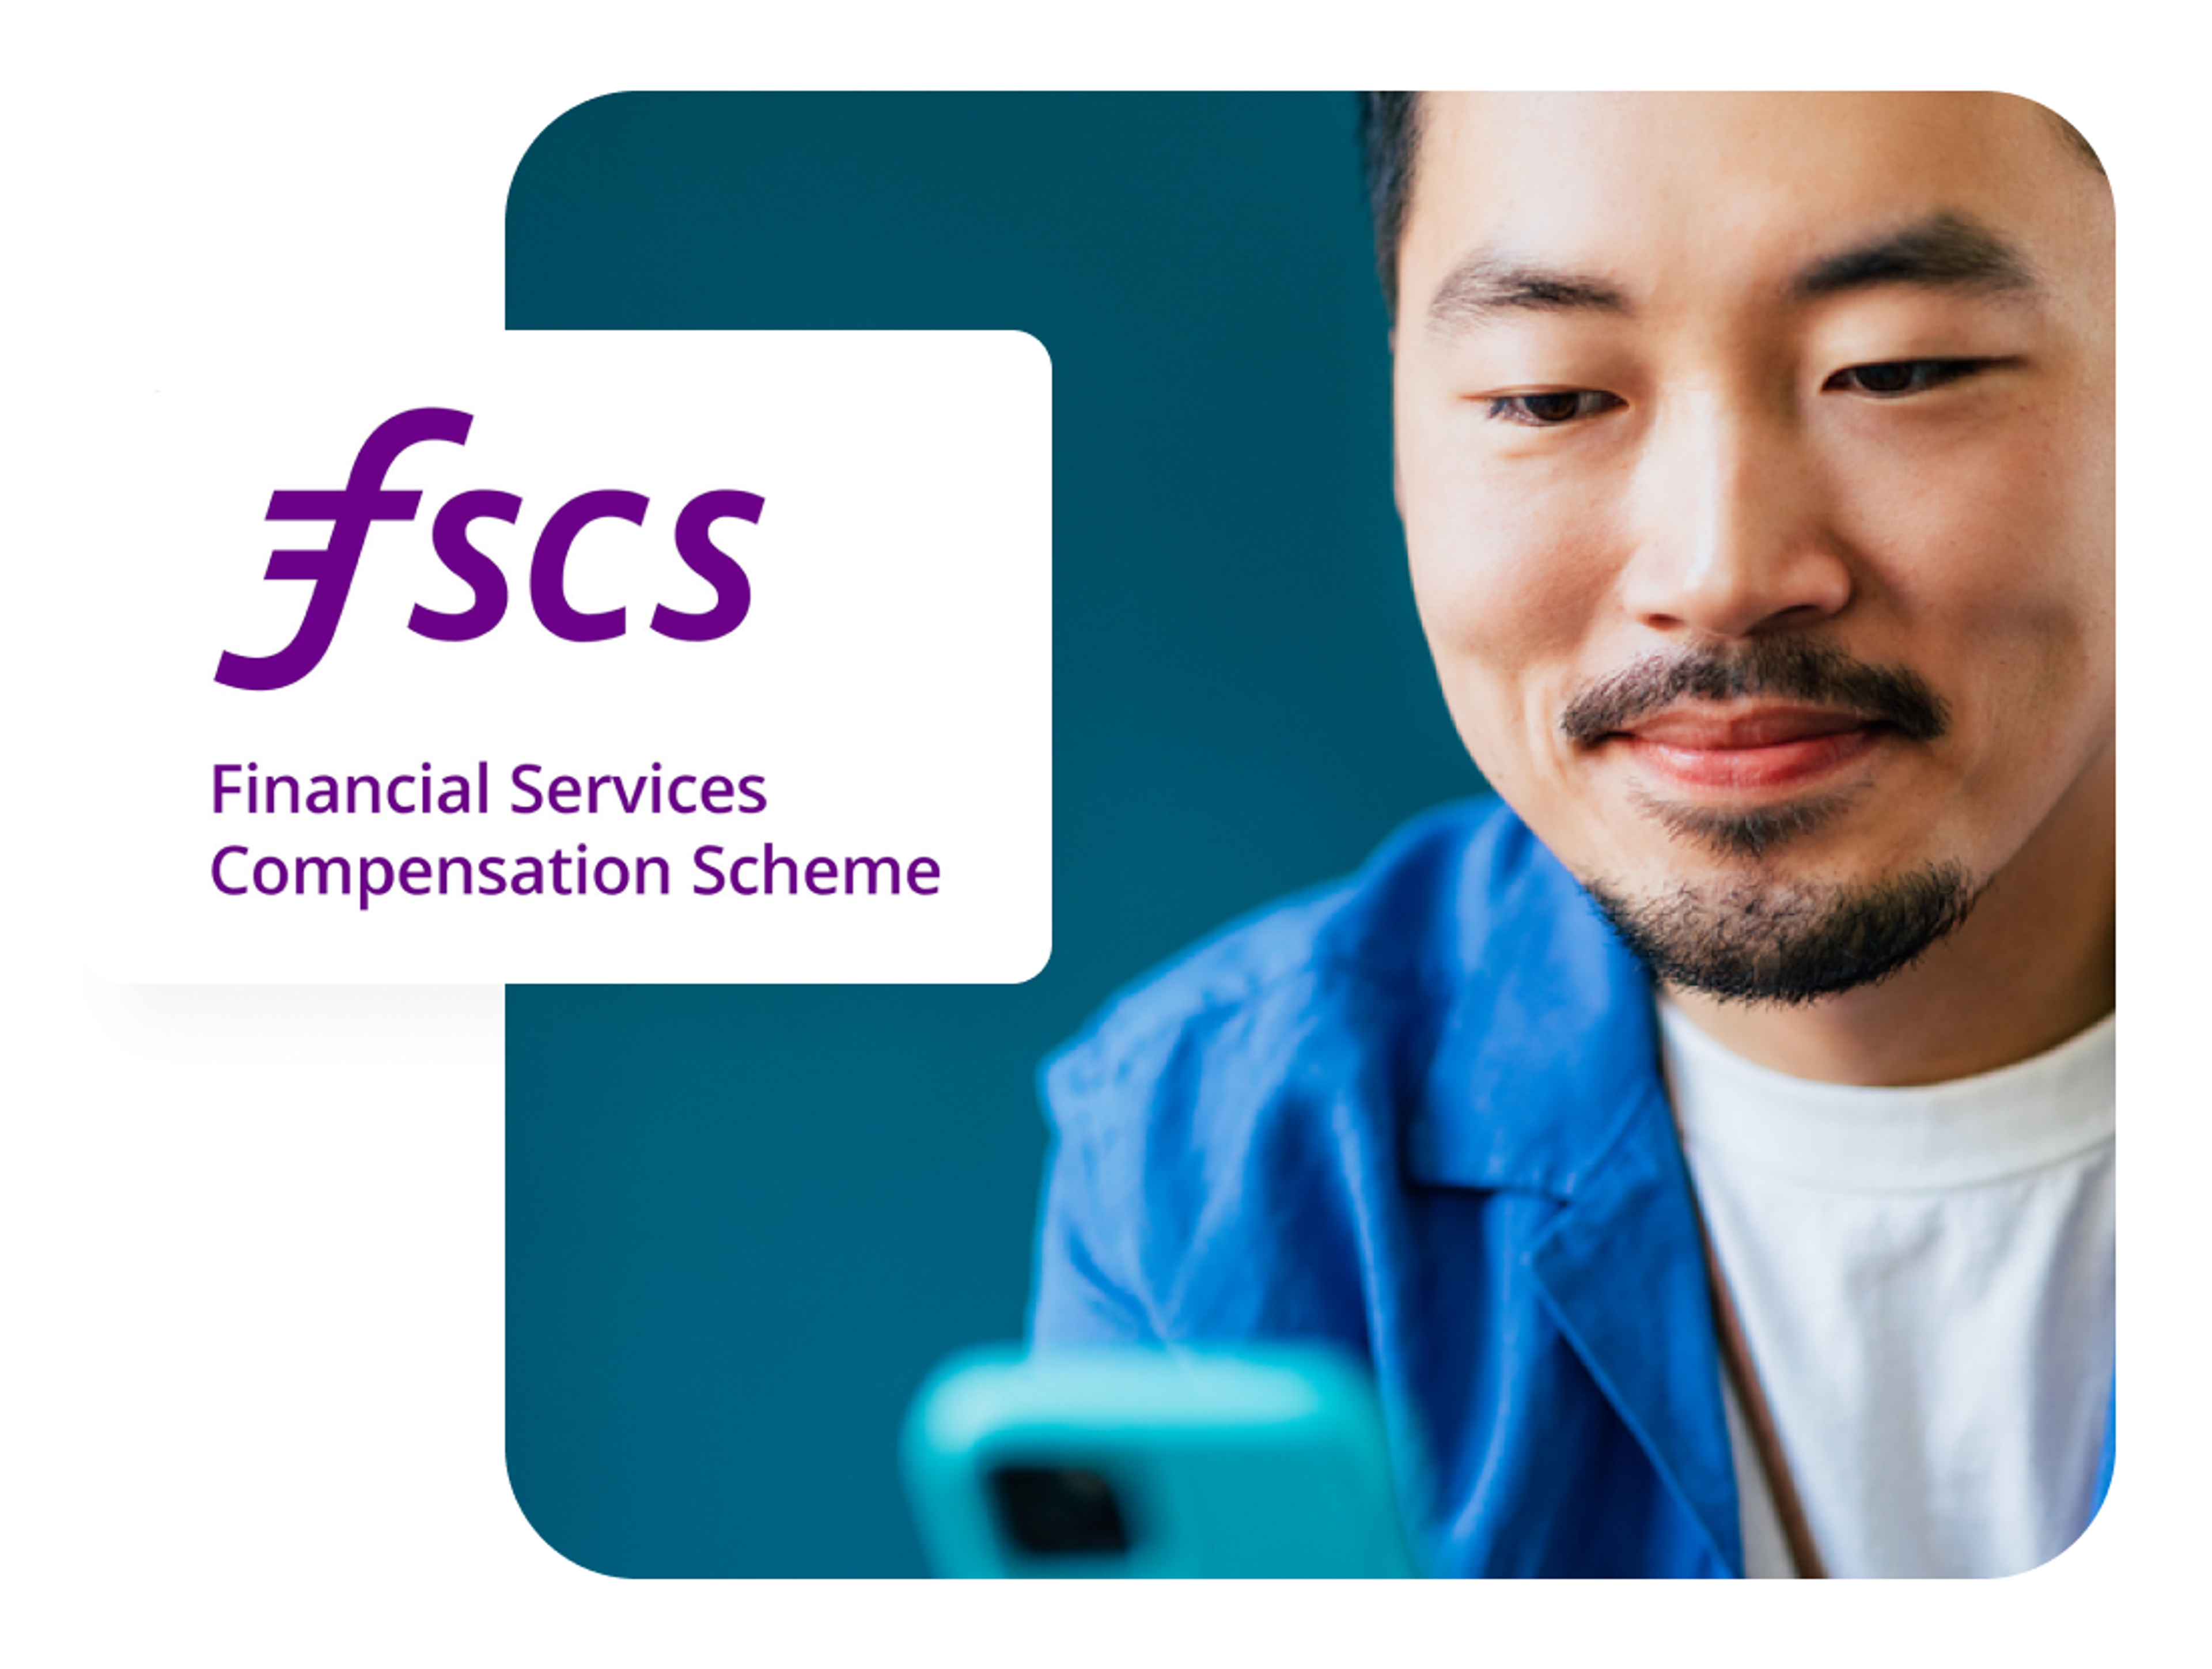 A close up photo of a man smiling while looking at a phone and the FSCS logo